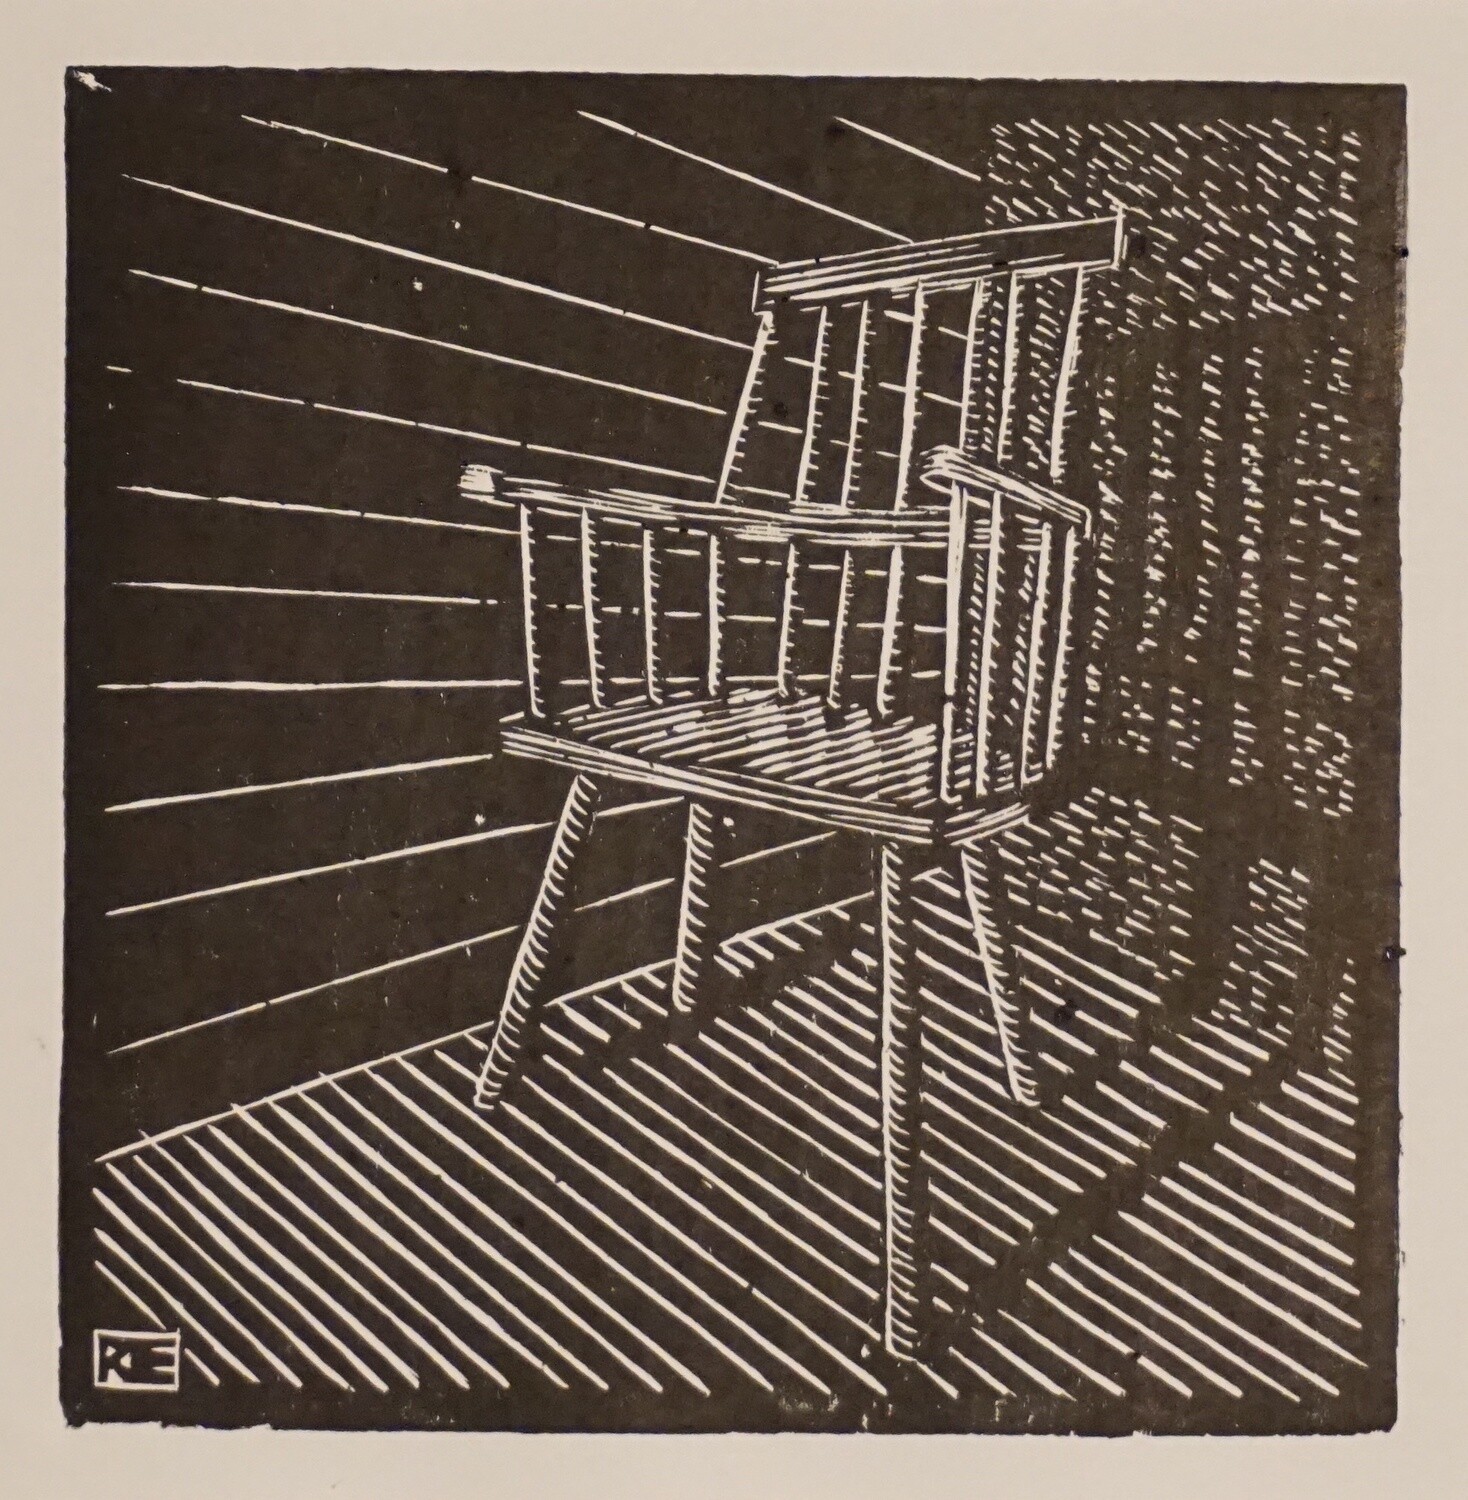 Chair in room with shadow (not framed)